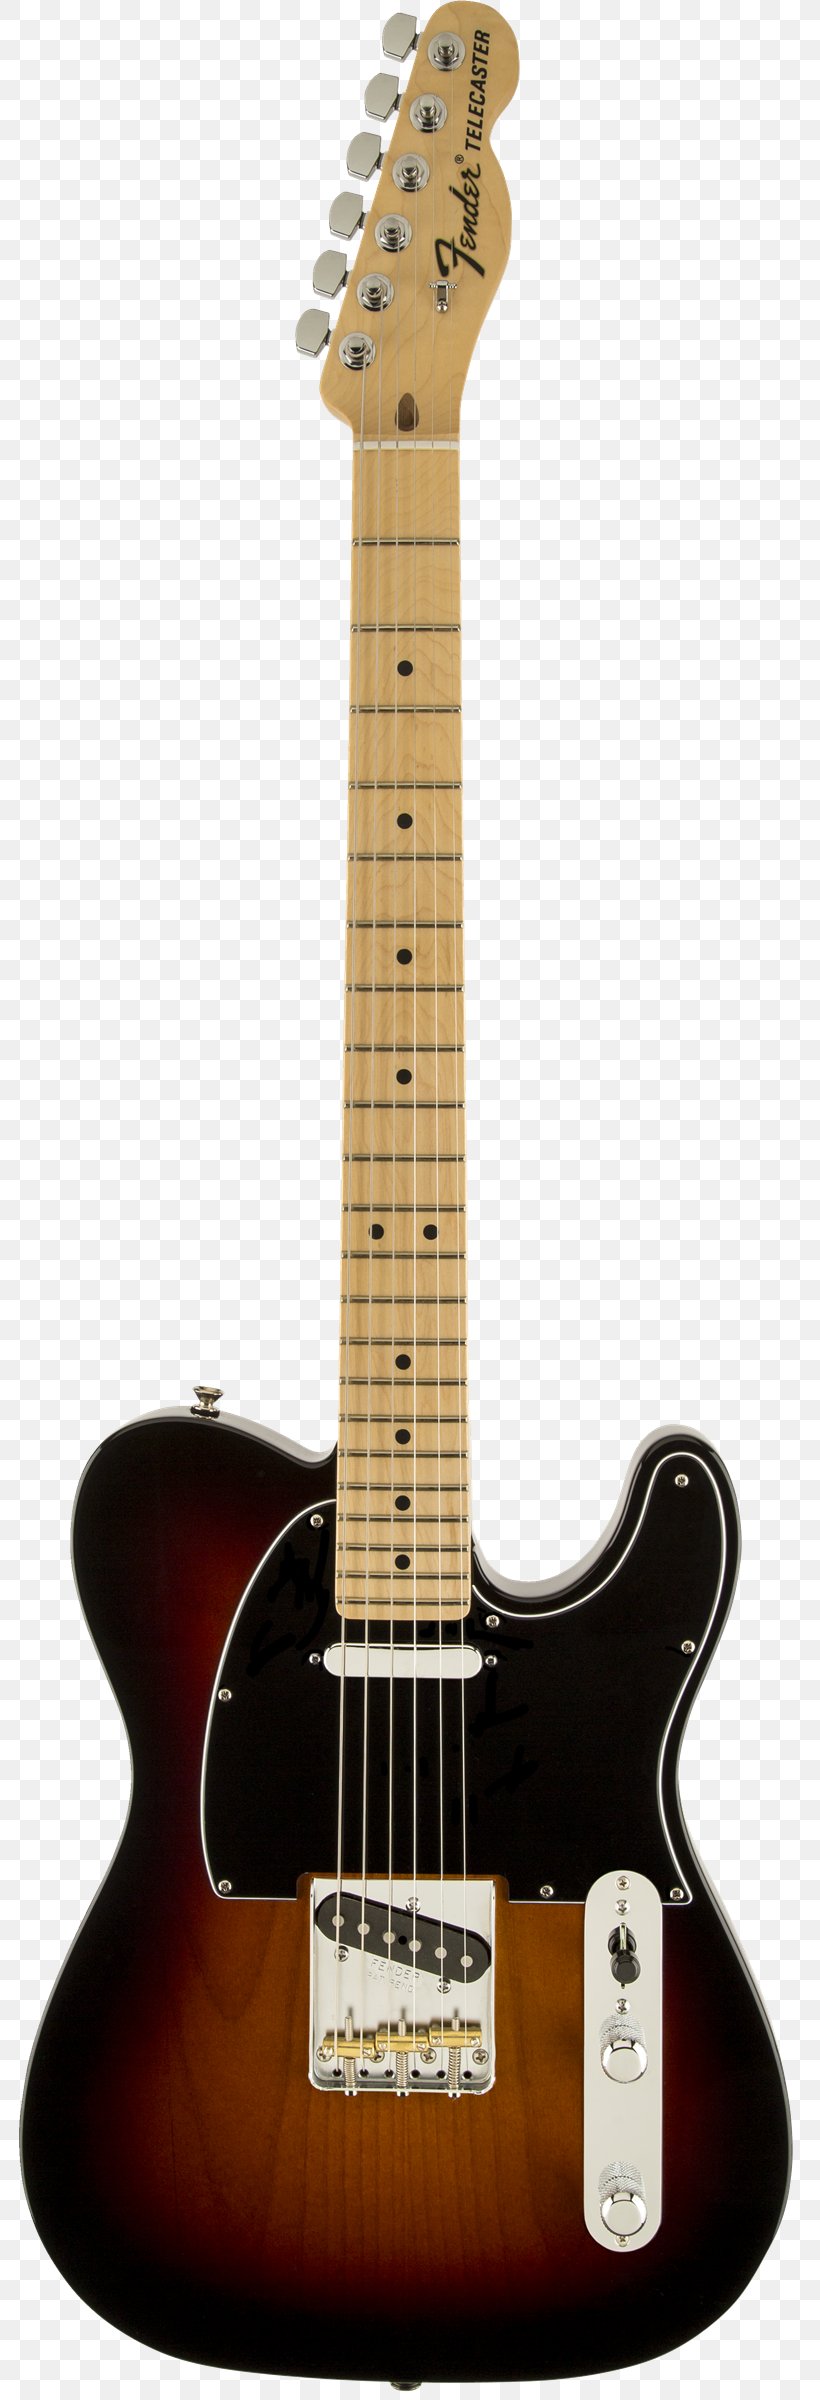 Fender Telecaster Deluxe Fender Stratocaster Fender Telecaster Custom Fender Telecaster Thinline, PNG, 783x2400px, Fender Telecaster, Acoustic Electric Guitar, Acoustic Guitar, Bass Guitar, Electric Guitar Download Free